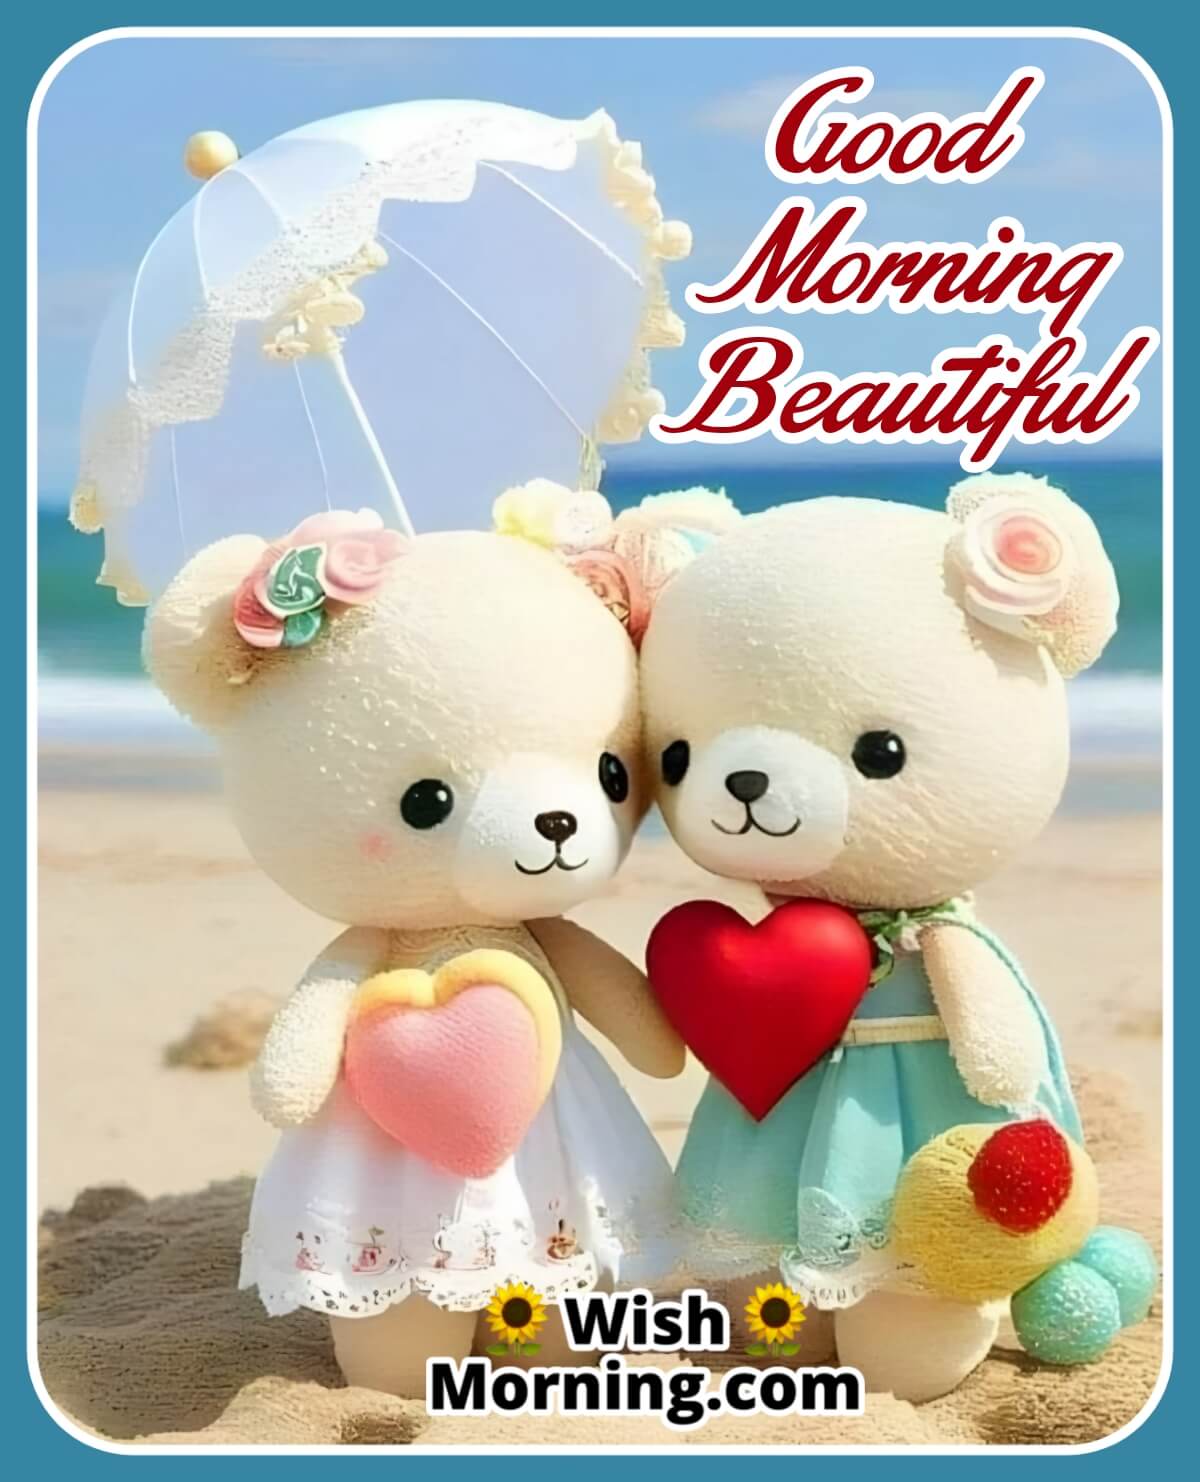 Beautiful Good Morning Teddy For Her